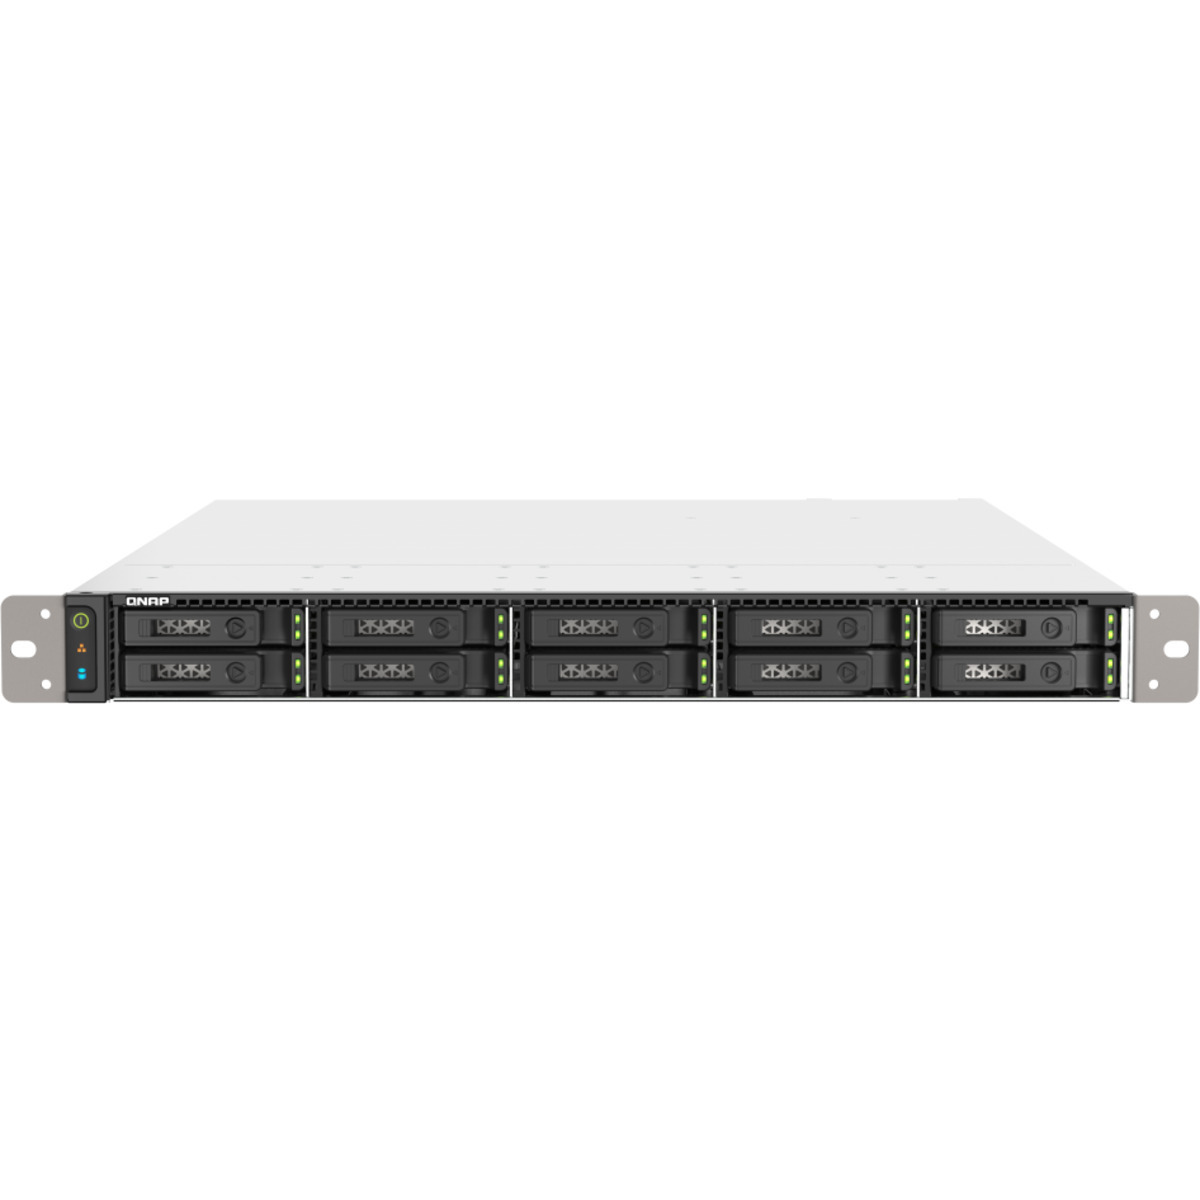 QNAP TS-h1090FU-7232P 20tb 10-Bay RackMount Large Business / Enterprise NAS - Network Attached Storage Device 10x2tb Samsung 870 EVO MZ-77E2T0BAM 2.5 560/530MB/s SATA 6Gb/s SSD CONSUMER Class Drives Installed - Burn-In Tested TS-h1090FU-7232P